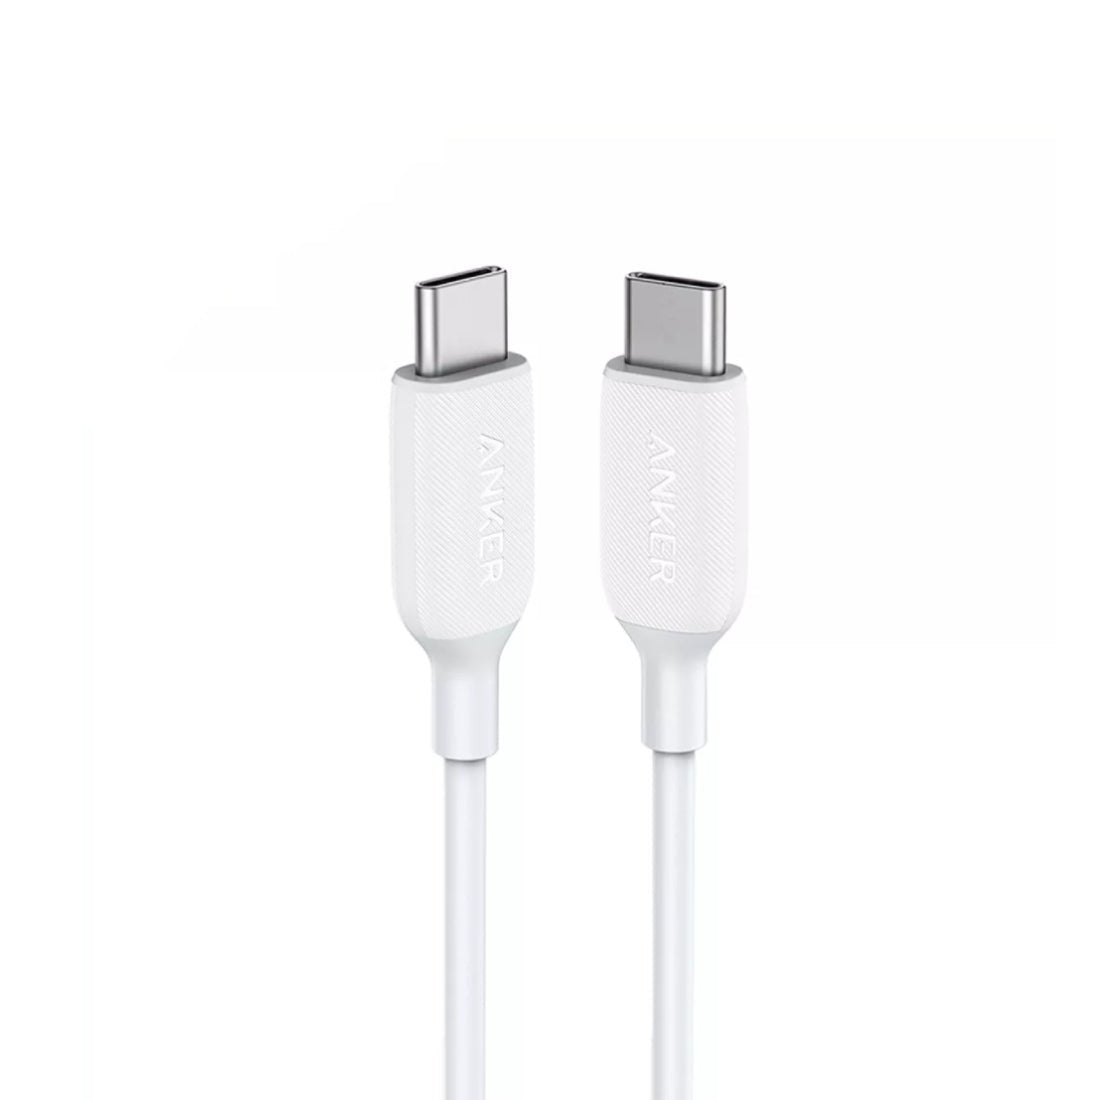 Anker PowerLine III 6ft USB-C to USB-C Cable - White - كابل - Store 974 | ستور ٩٧٤